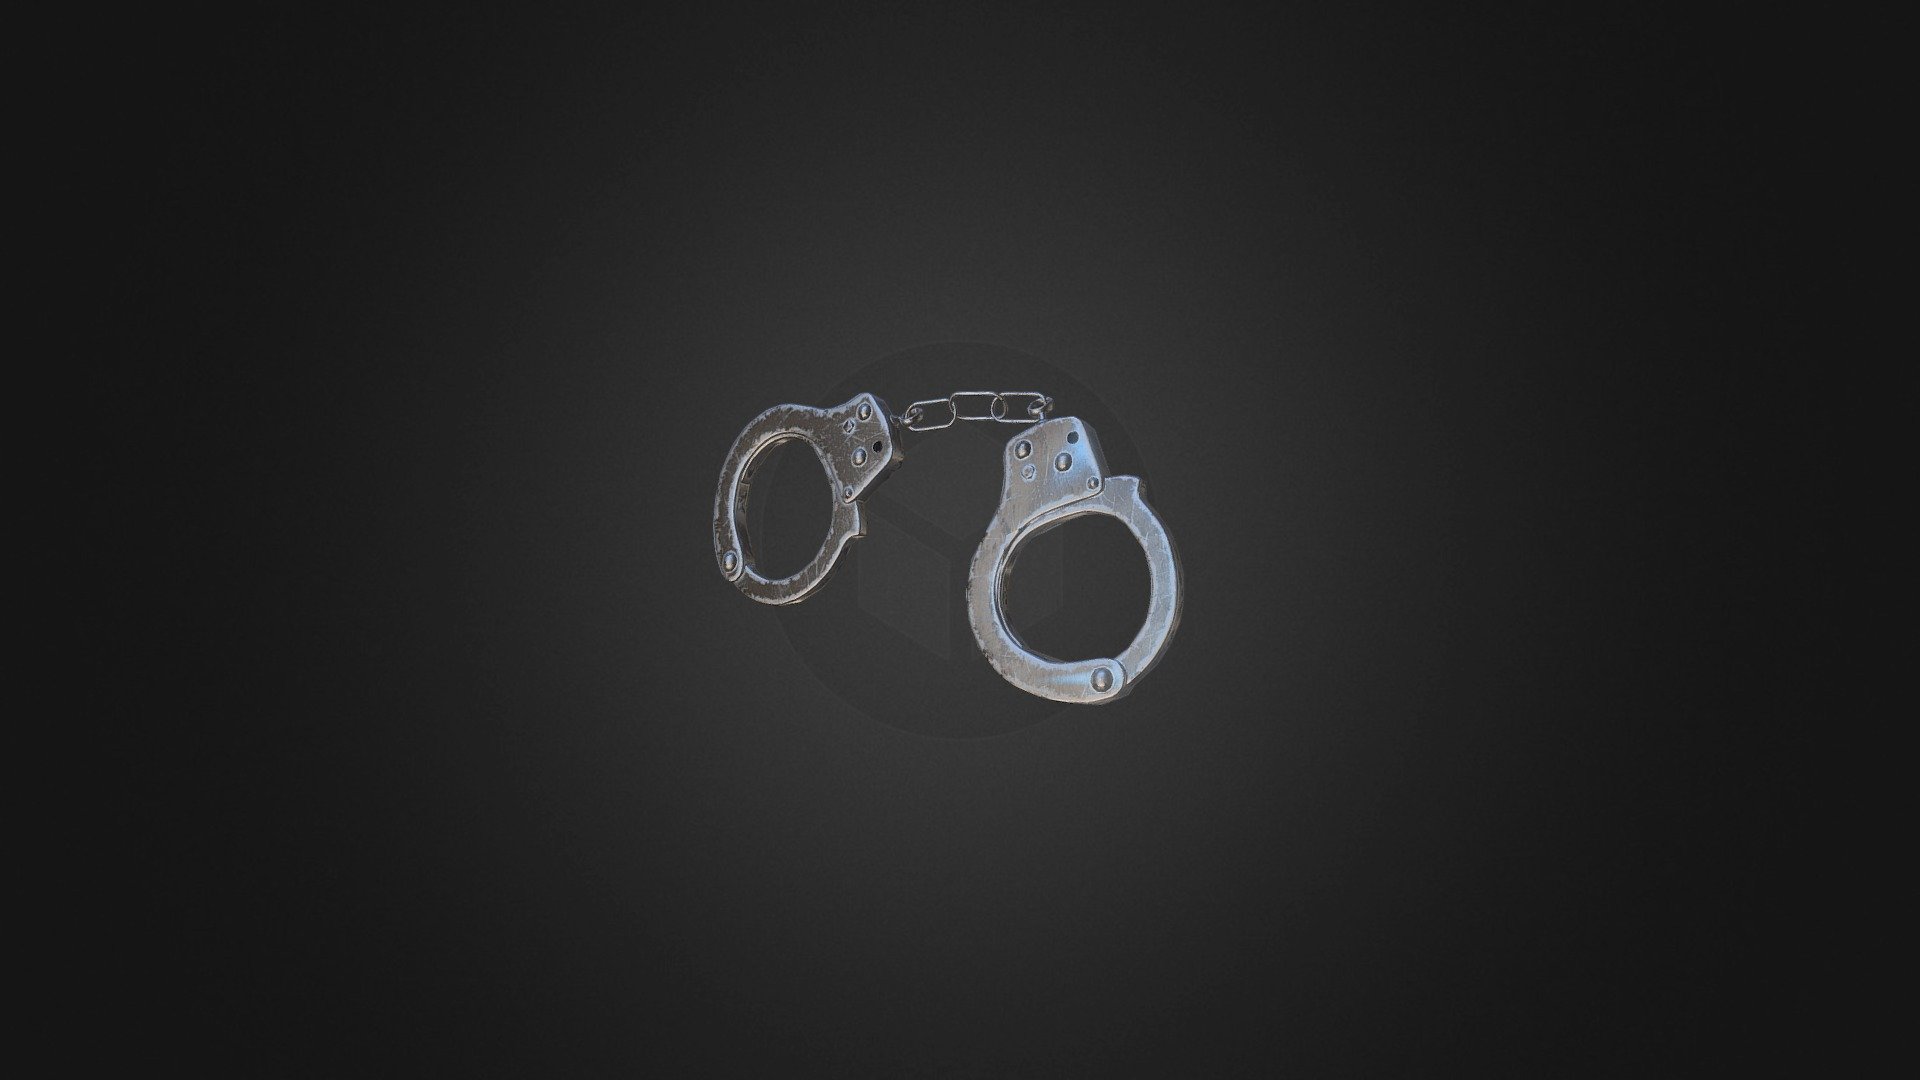 for unity5 - handcuffs - 3D model by jet (@jet1122) 3d model